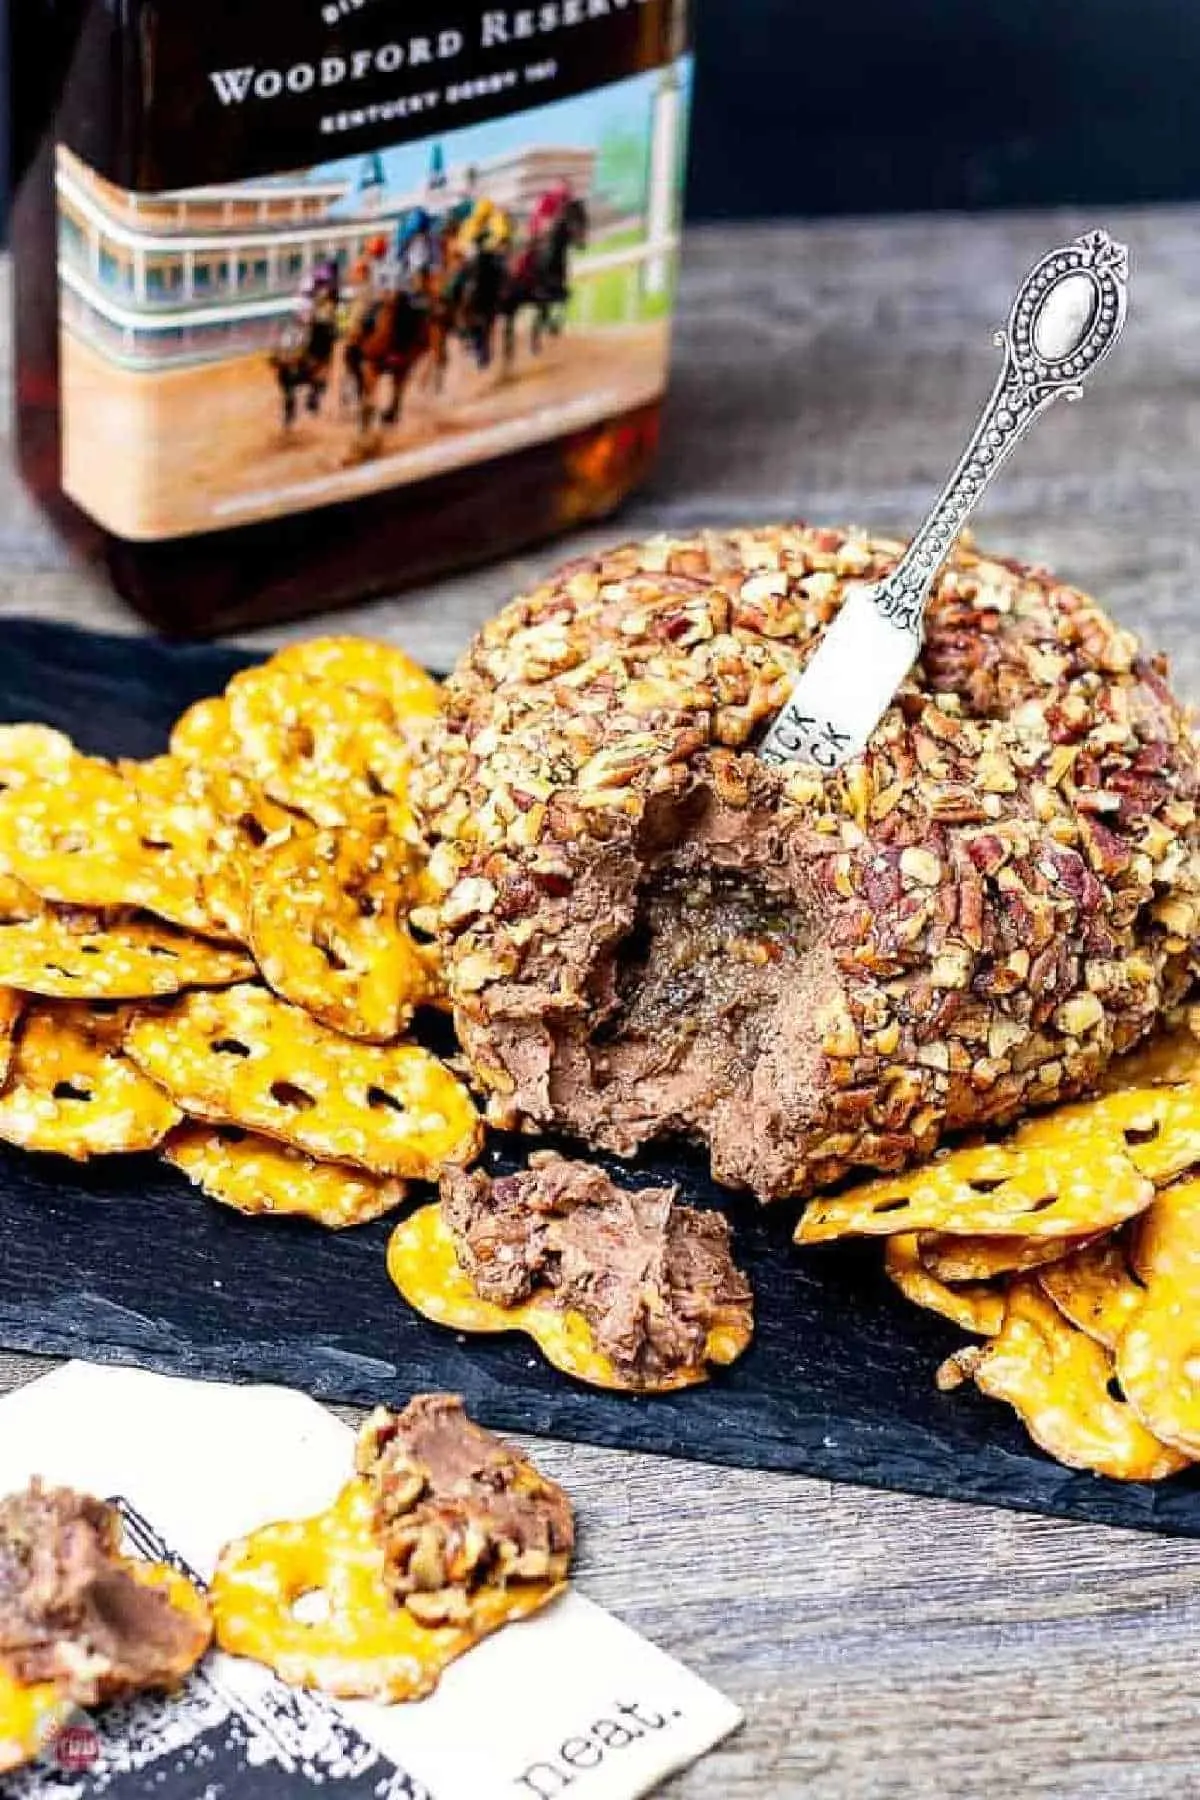 Derby Pie cheese ball with spreading knife